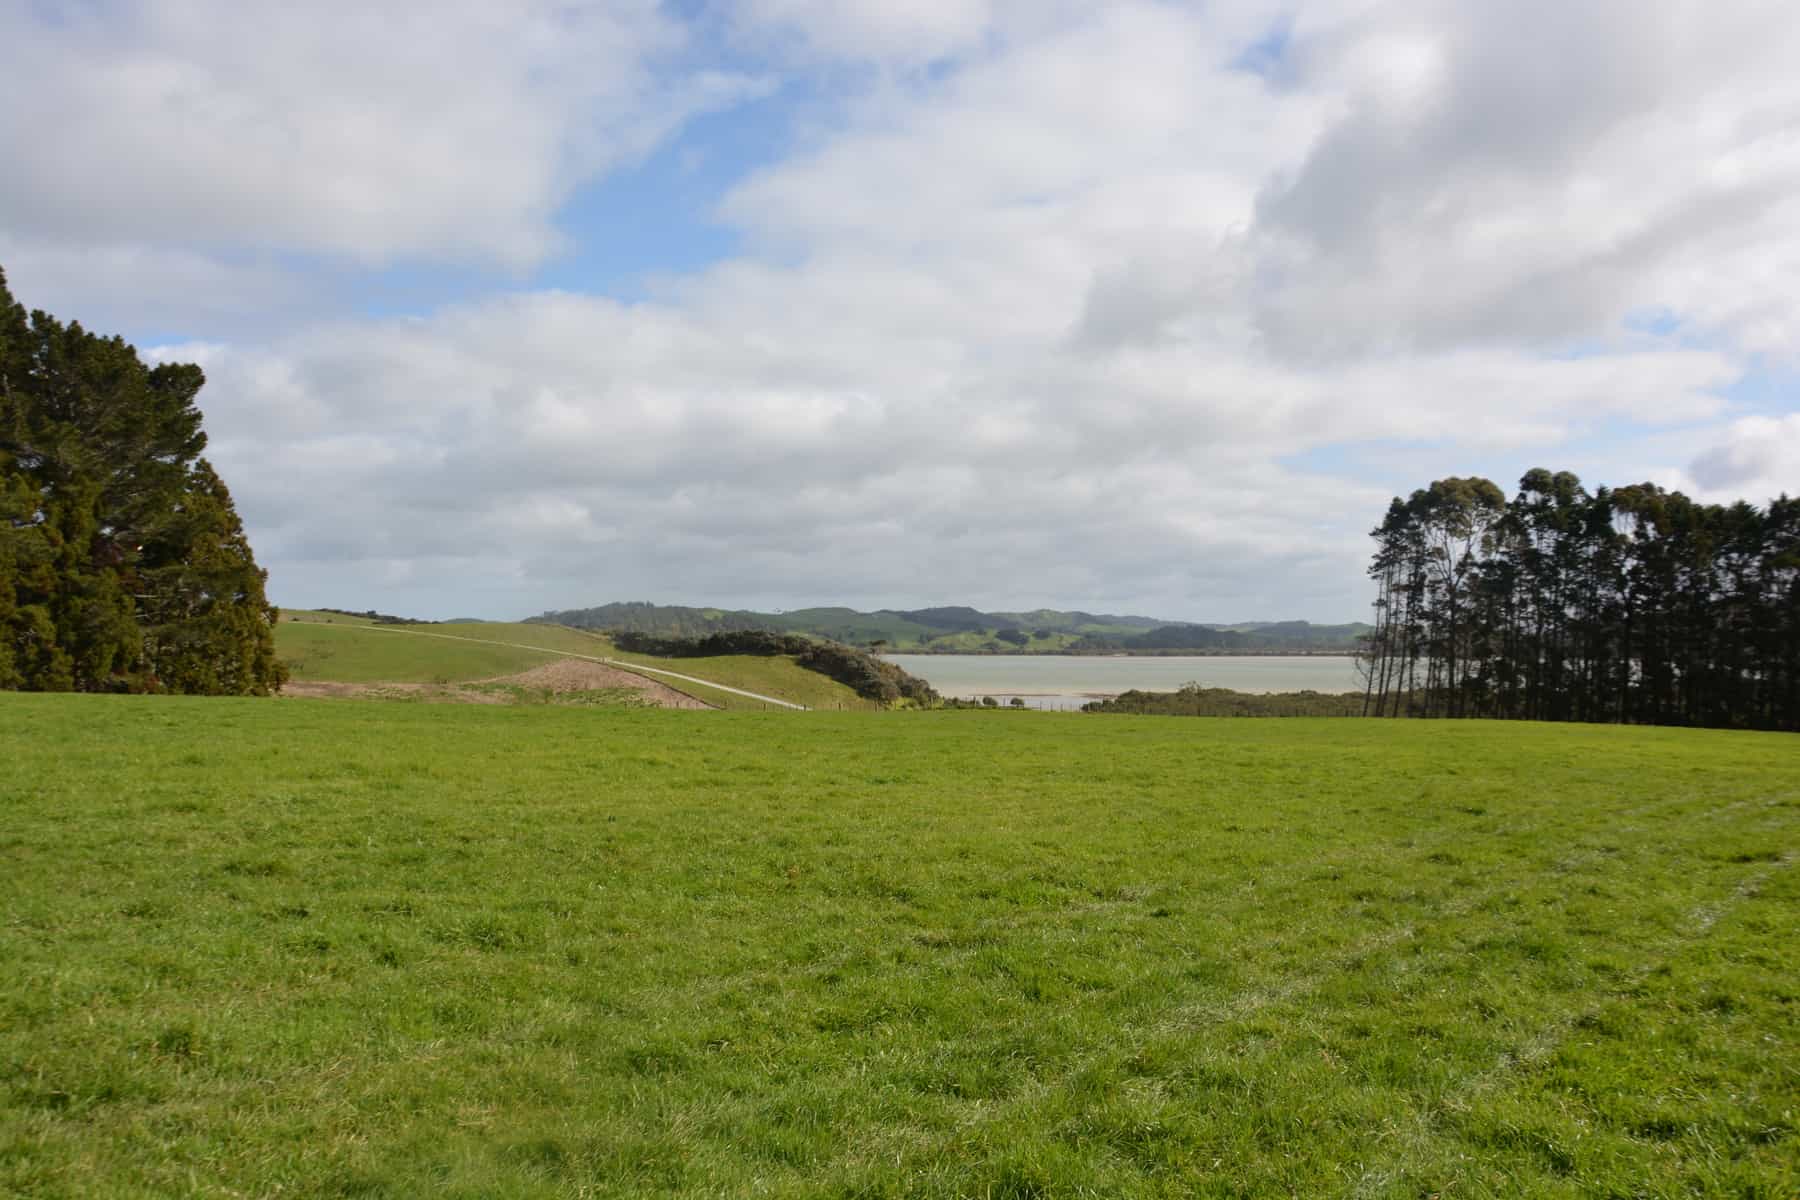 Scenic Atiu Creek Regional Park situated on the Kaipara Harbour in northwest Auckland